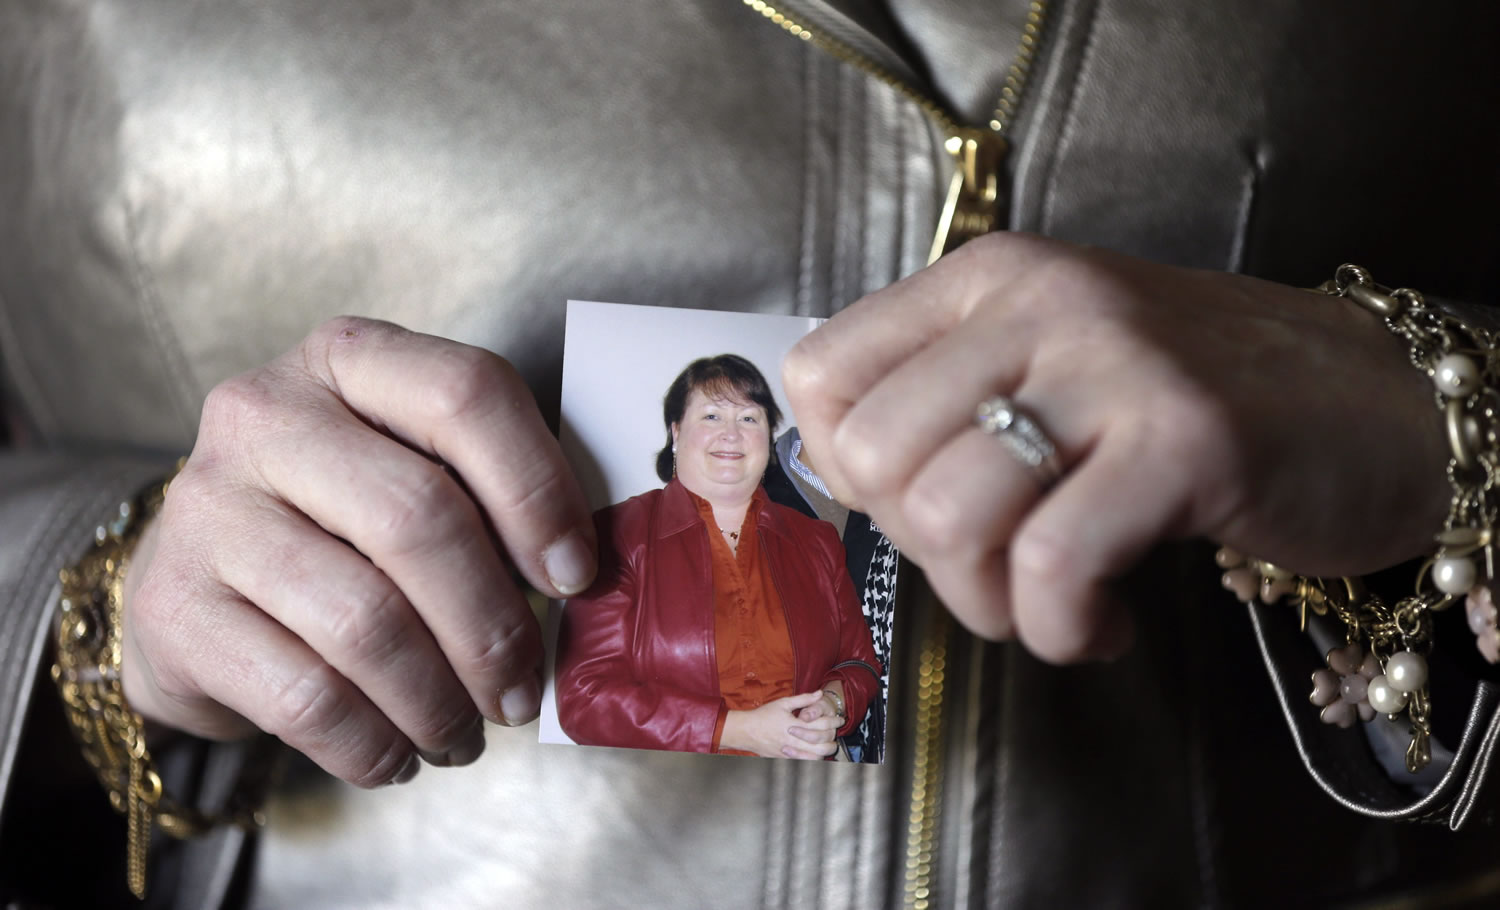 Heather Britton holds a photo of herself made before her weight-loss surgery at her home in Bay Village, Ohio.